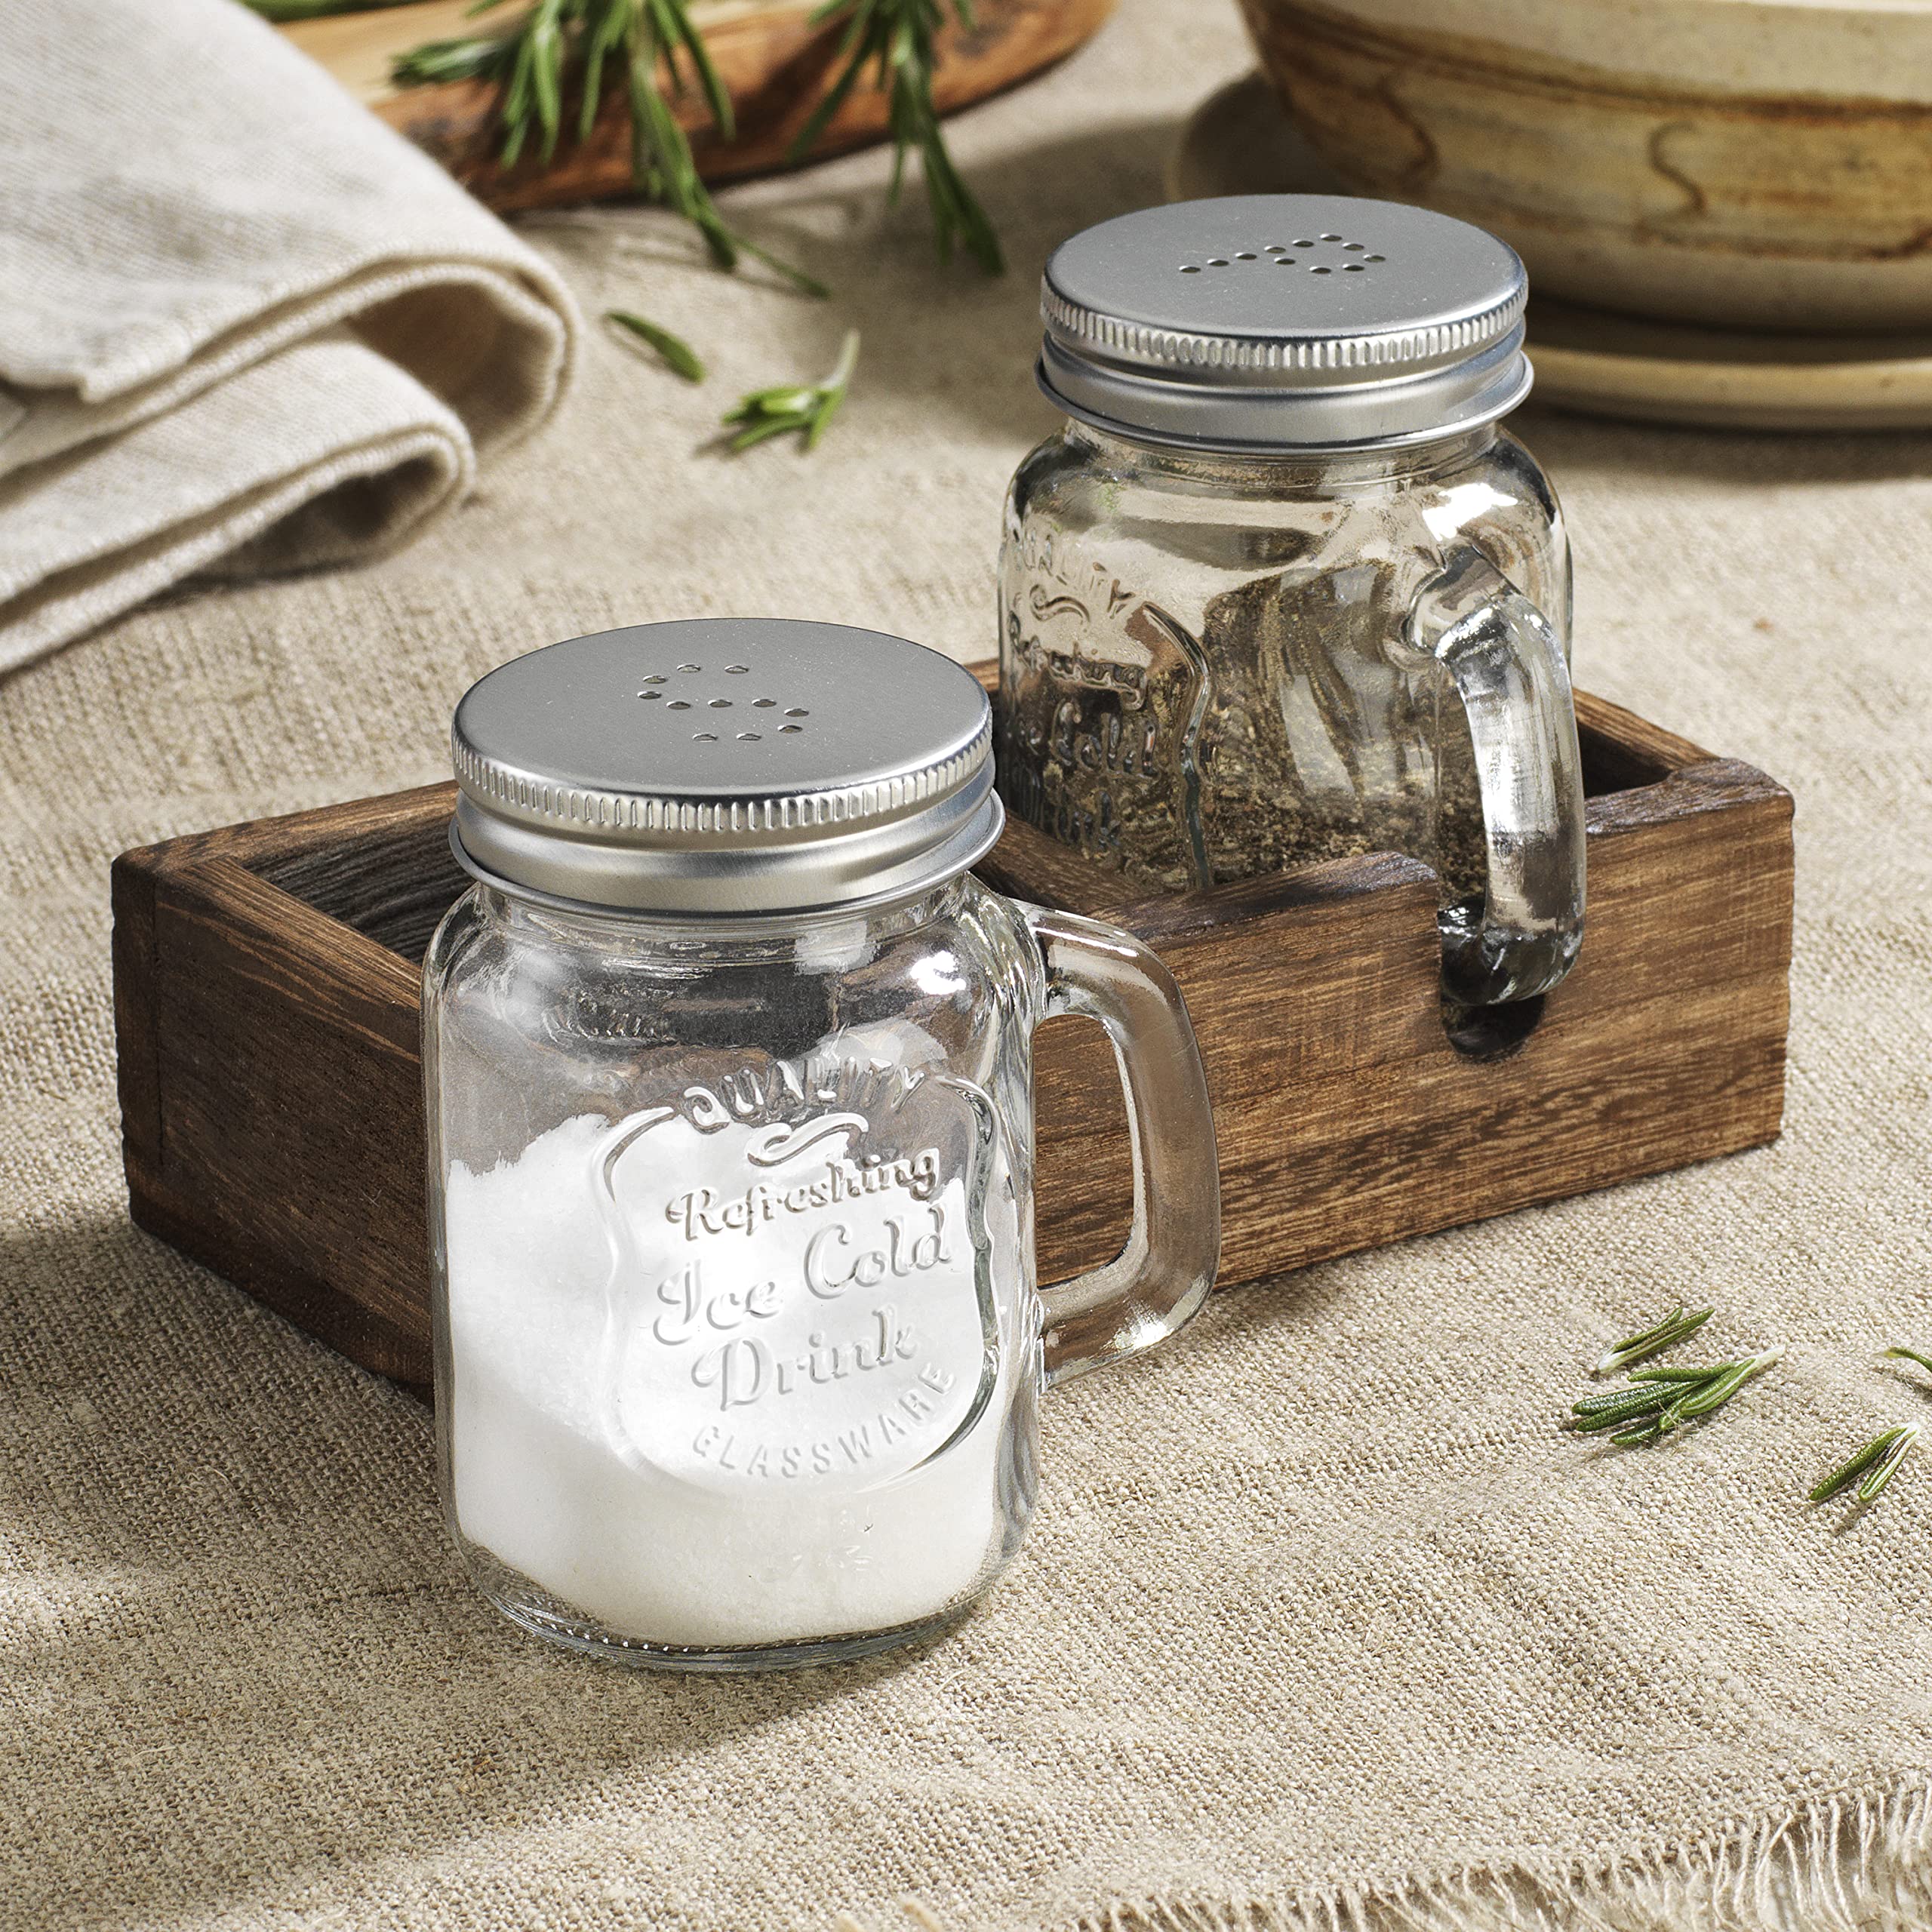 MosJos Mason Jar Salt and Pepper Shakers - Vintage Glass Condiment Dispenser Set with Wooden Holder Caddy - Farmhouse Kitchen Decor, Easy Refill 5-ounce Capacity with Stainless Steel Lids  - Acceptable